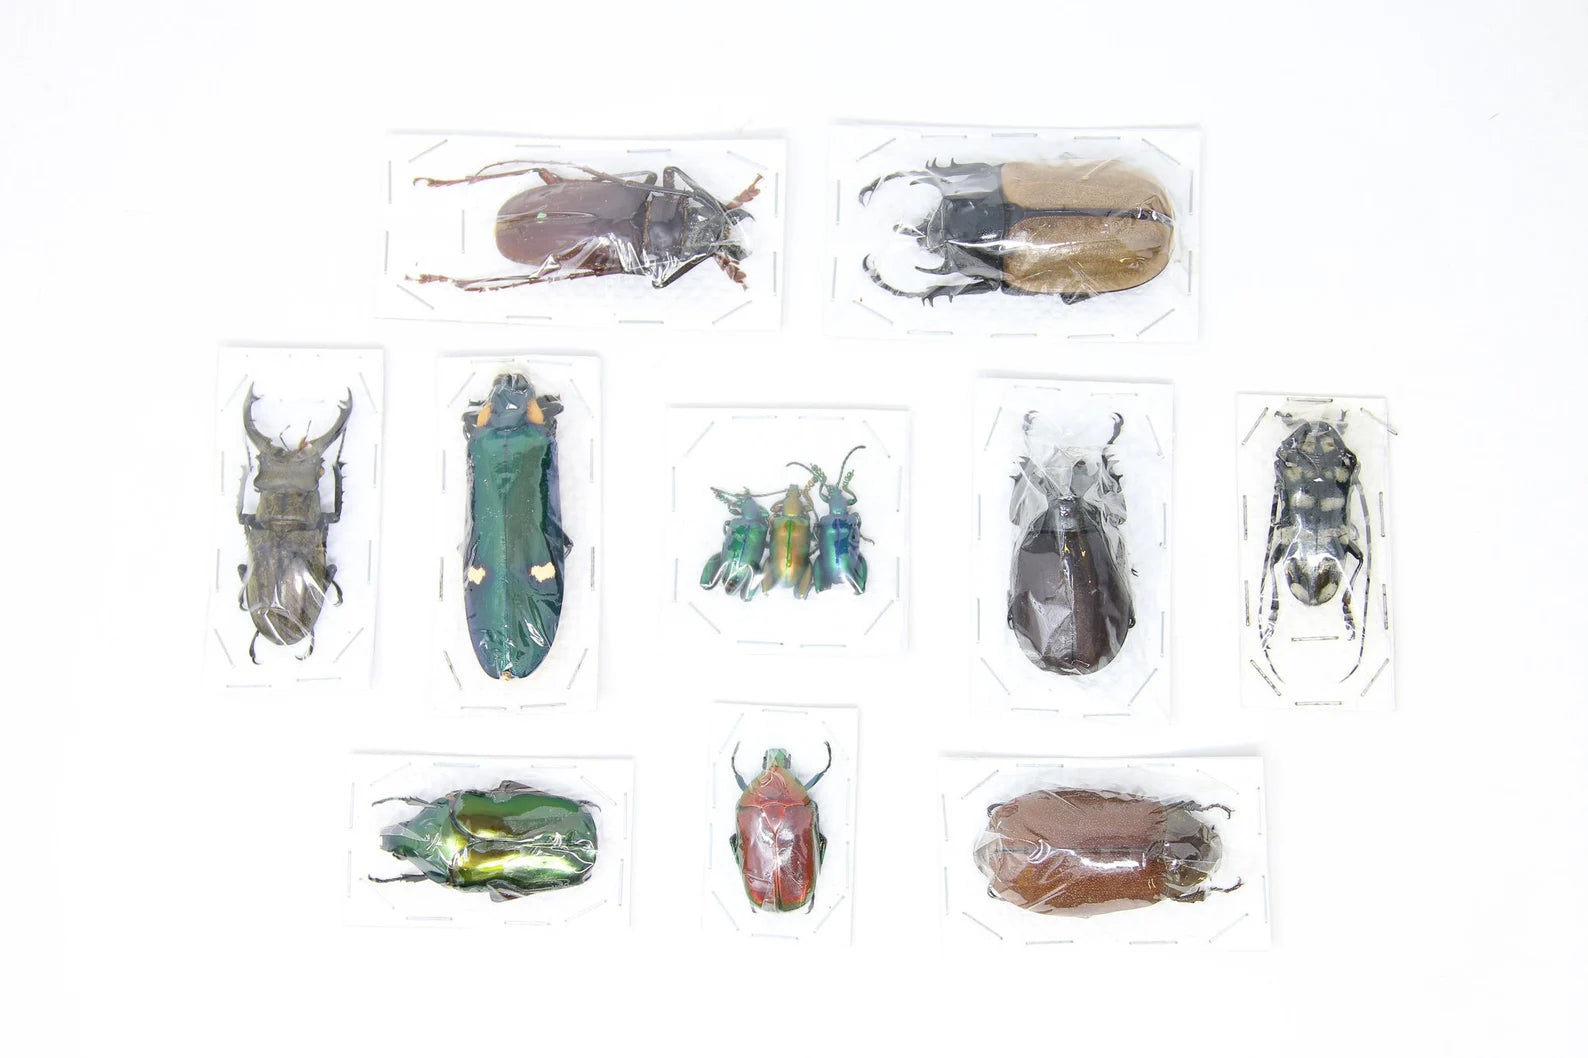 Mixed Assorted Insects Bug Collection, A1 Quality Real Dry-Preserved Specimens, Entomology Taxidermy Curiosities (LOT*111)